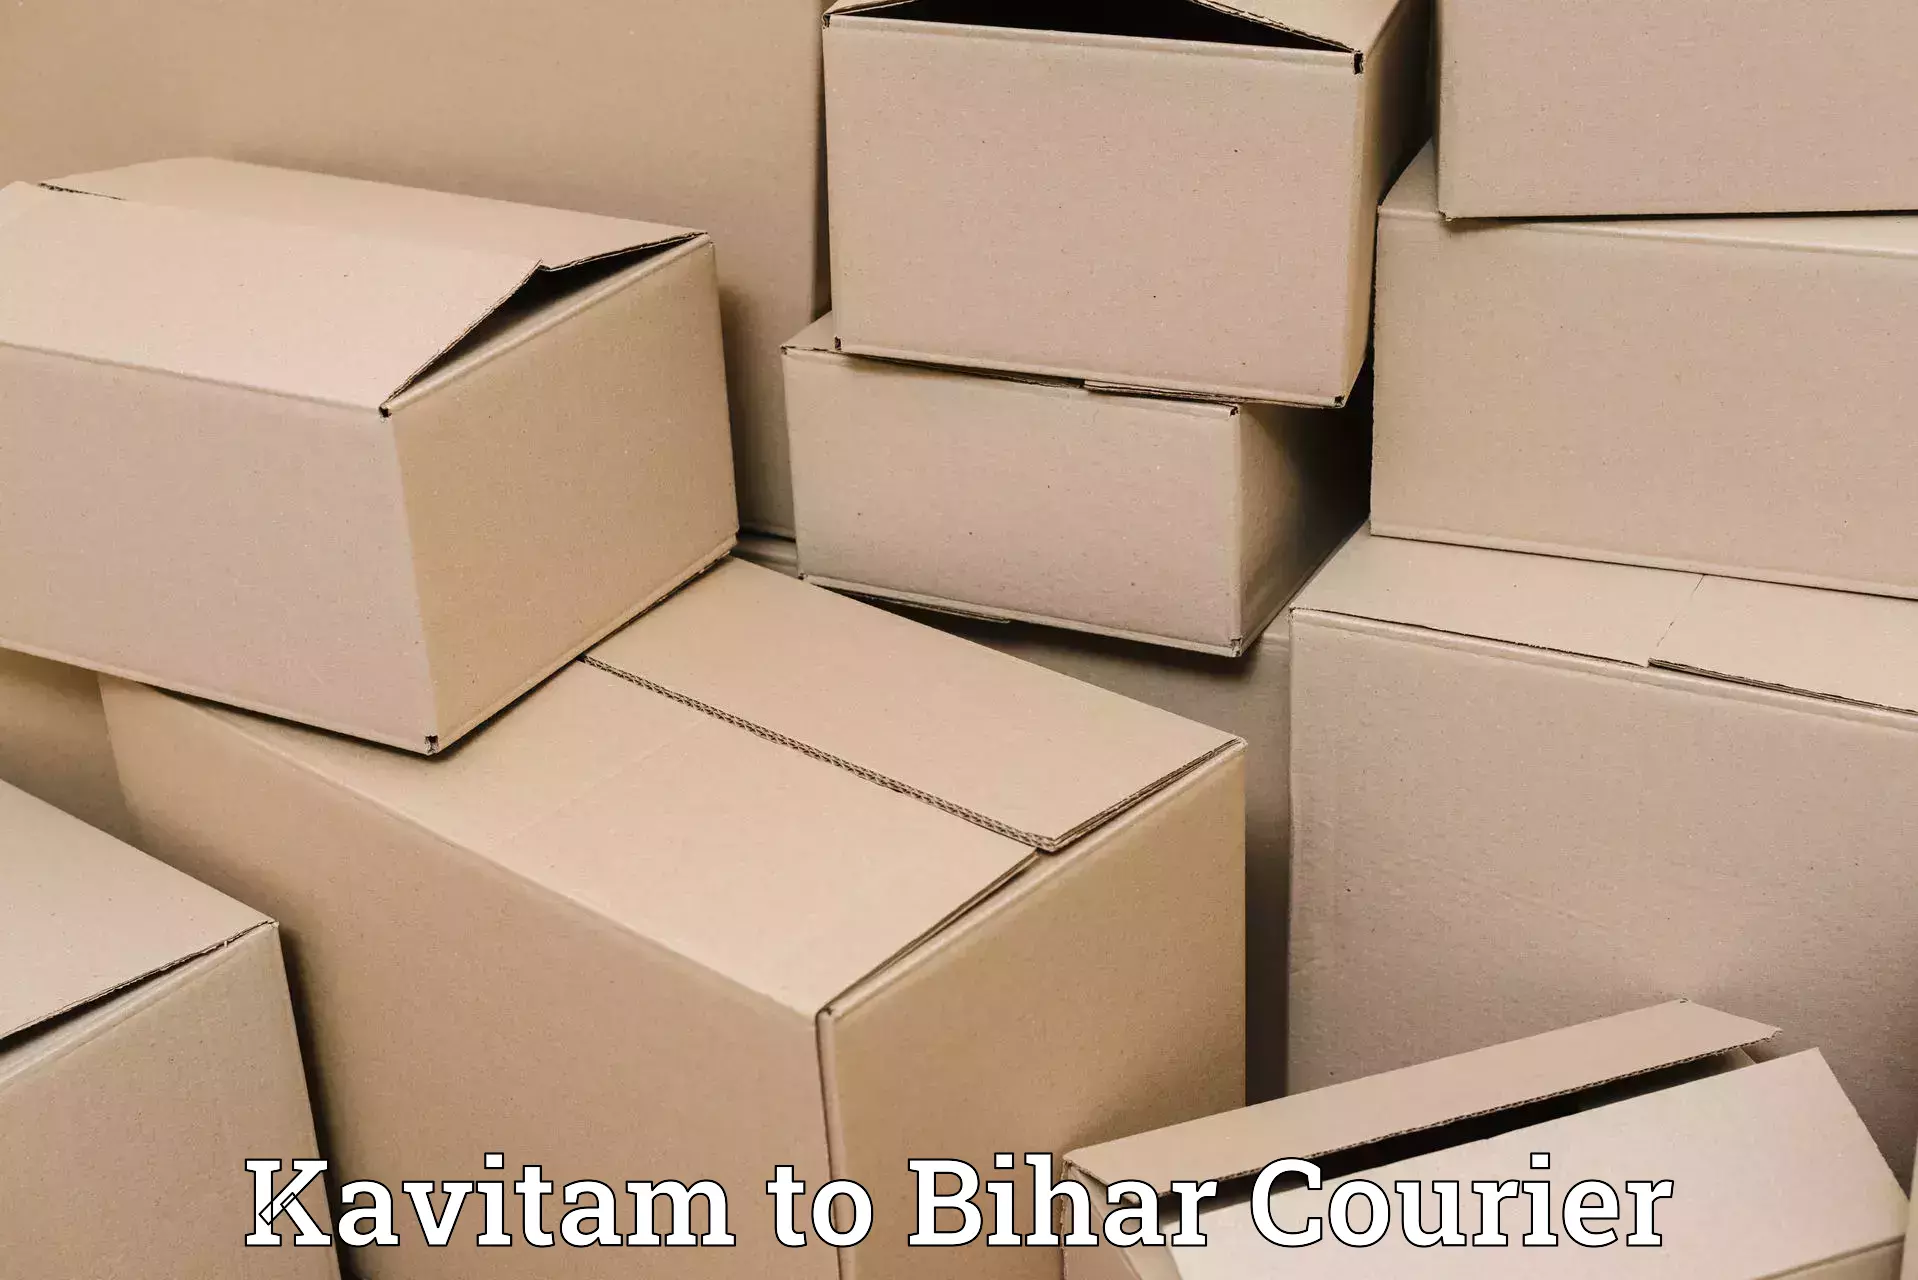 Courier service innovation in Kavitam to Runni Saidpur